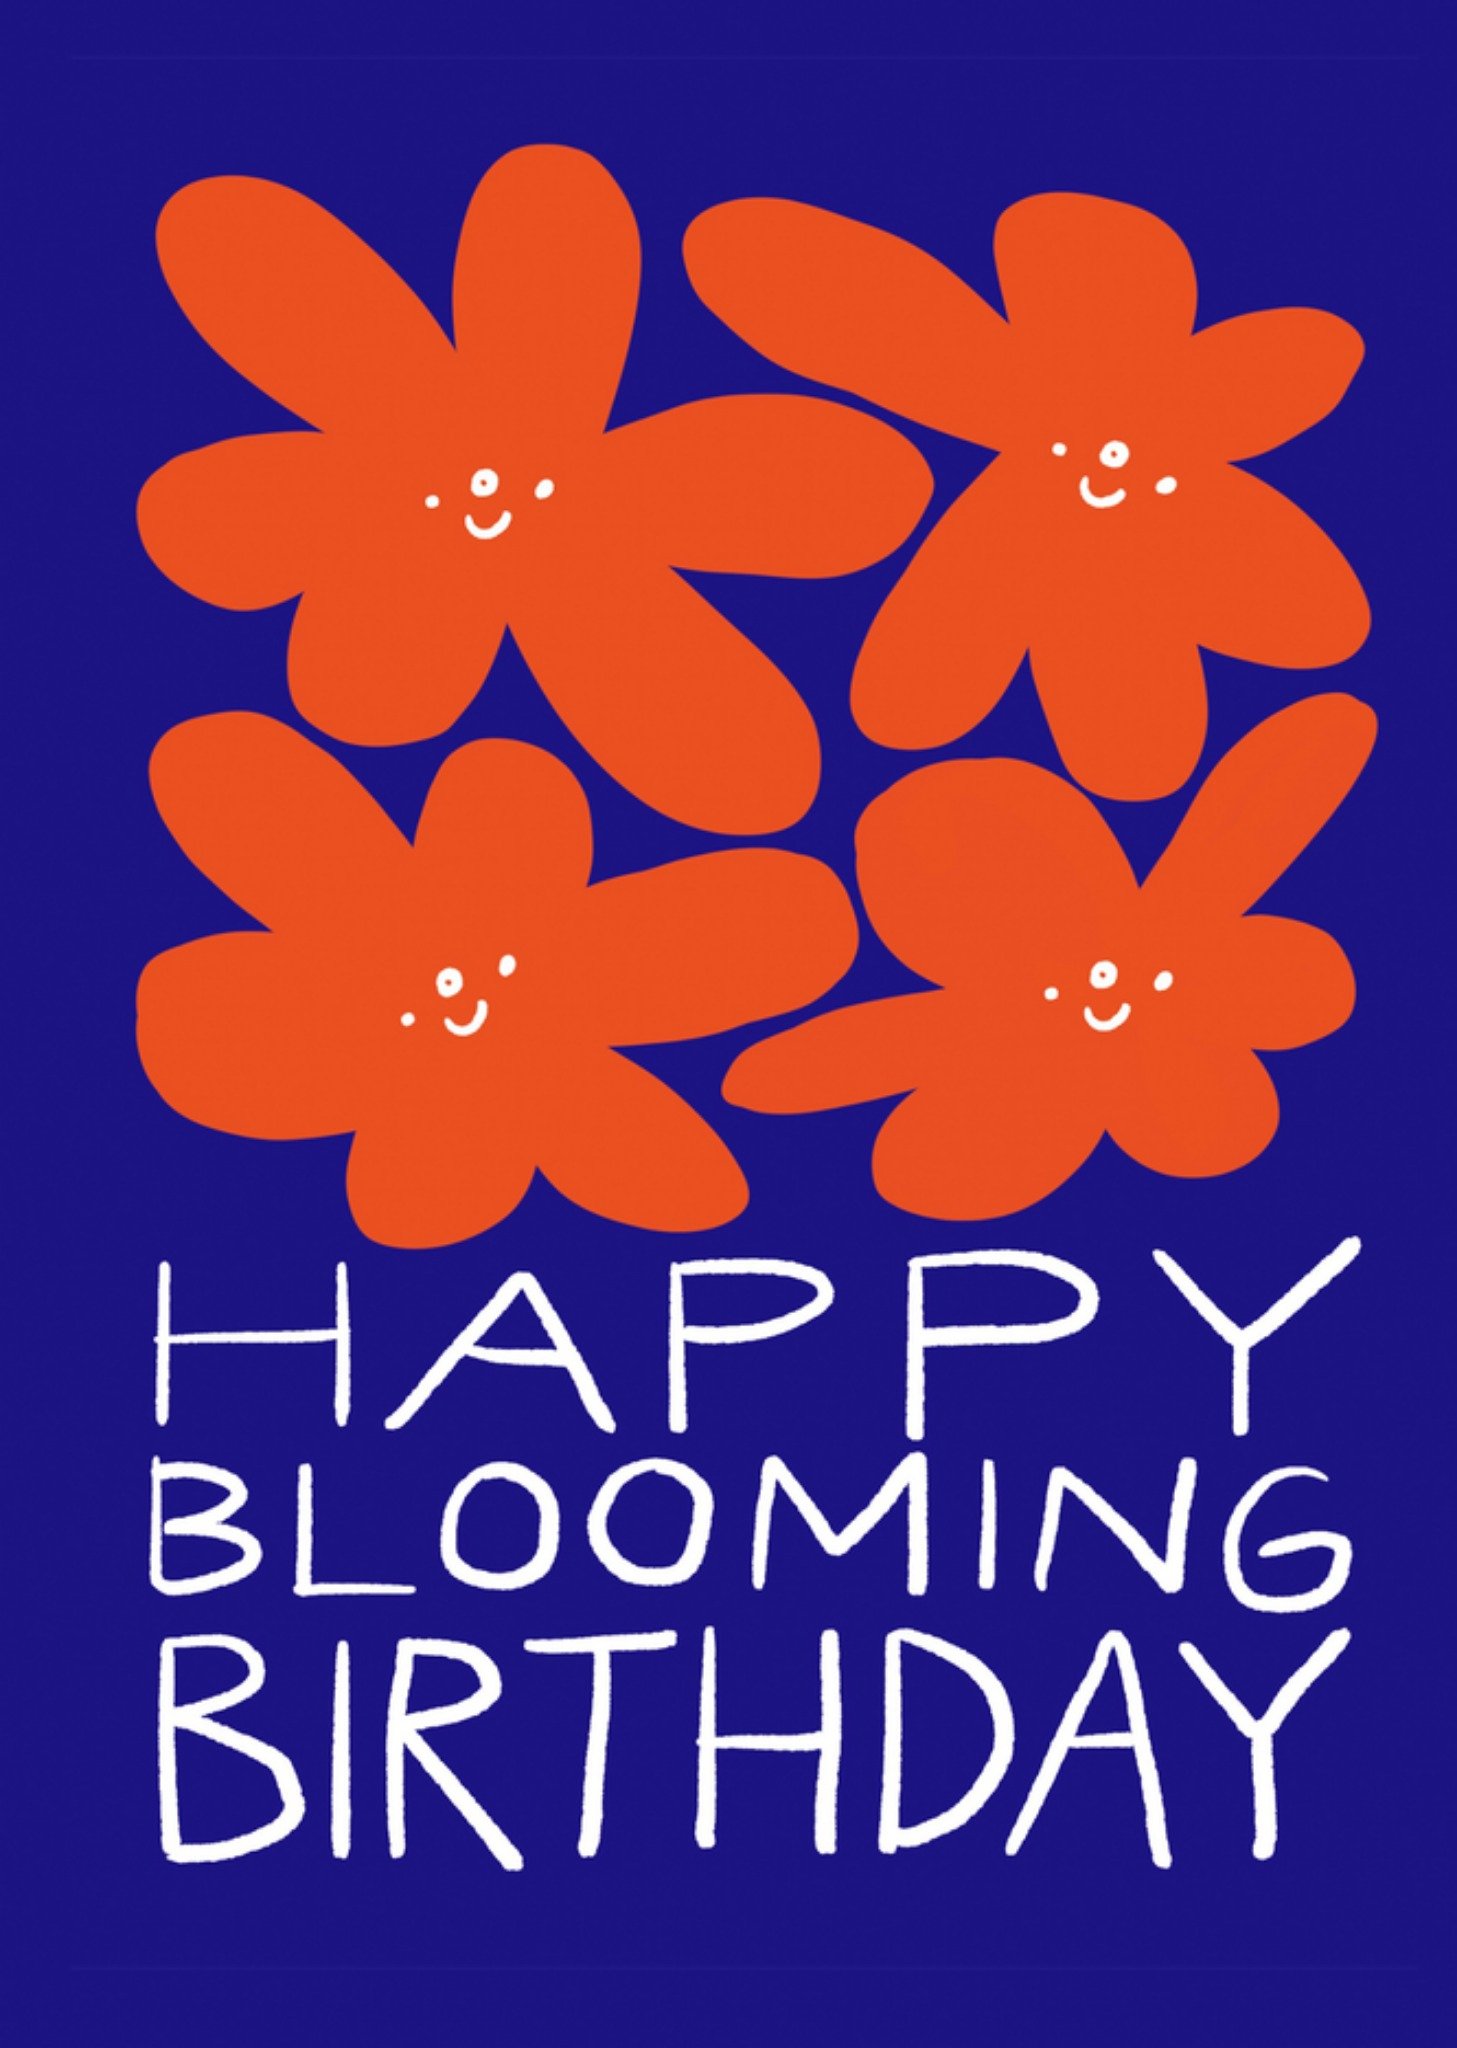 Moonpig Celebration Nation Brighter Days By Chloe Watts Happy Blooming Birthday Card, Large